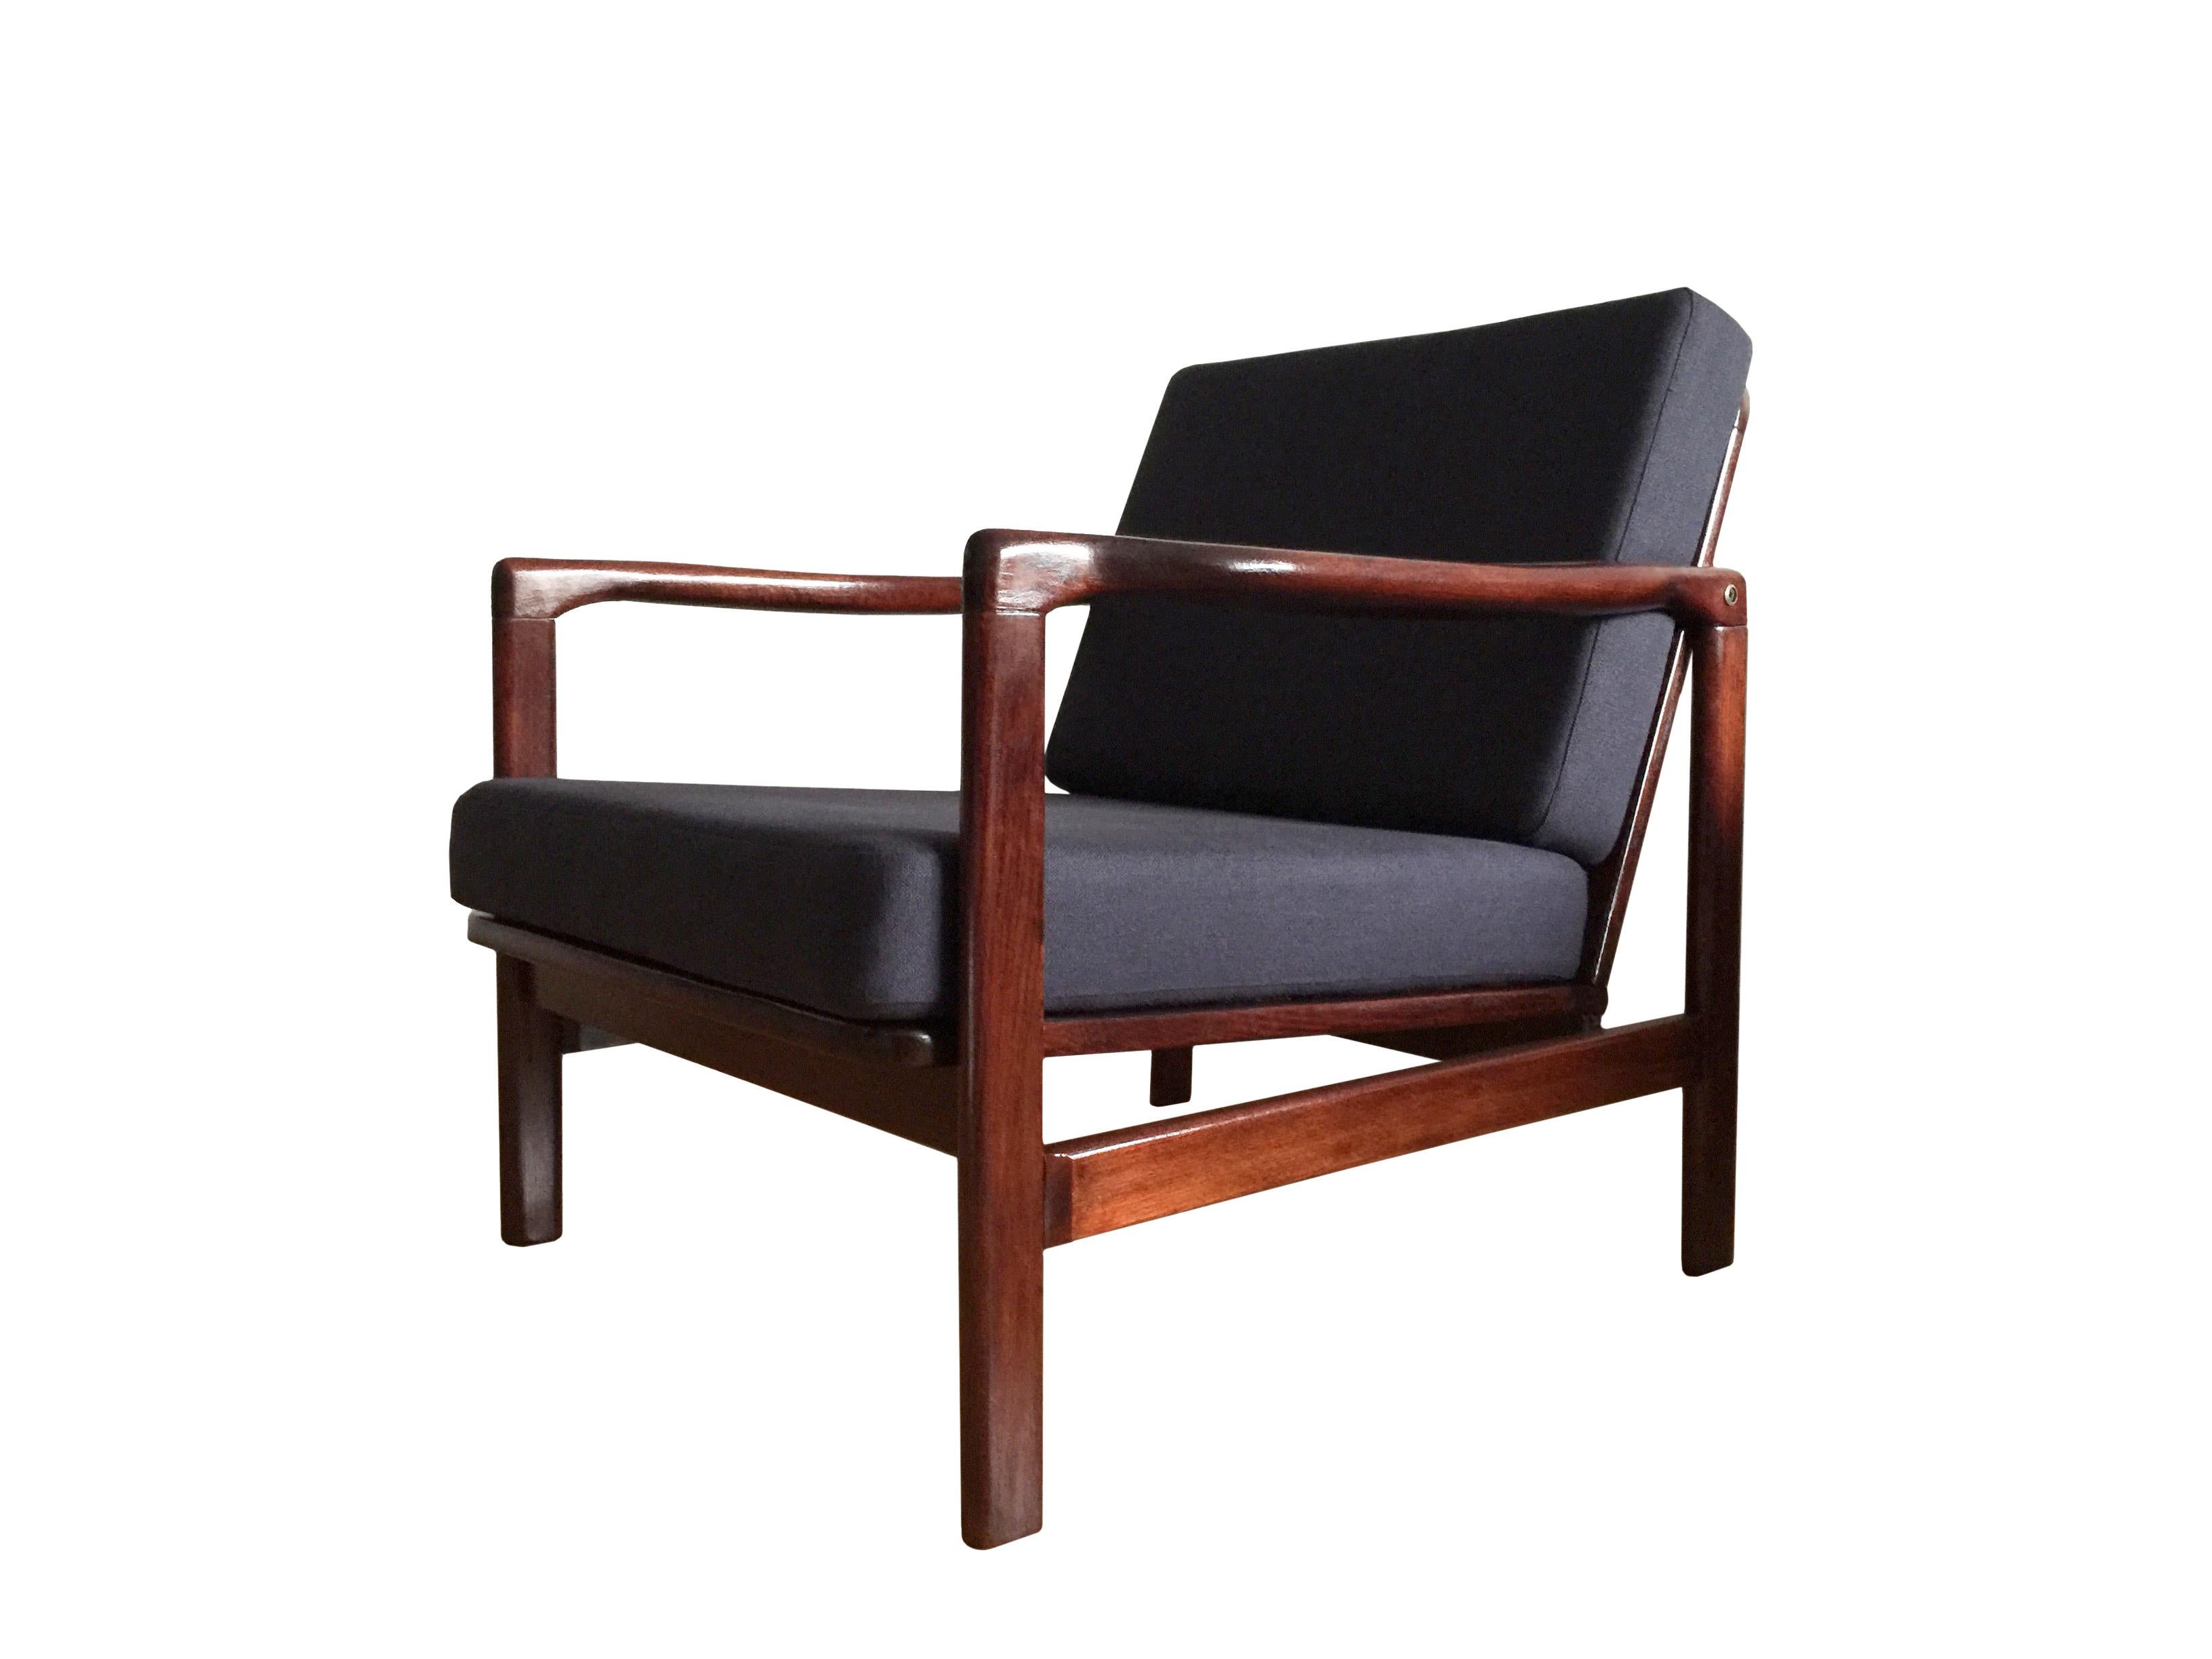 The set of two lounge chairs model B-7752, designed by Zenon Baczyk, has been manufactured by Swarzedzkie Fabryki Mebli in Poland in the 1960s. The structure is made of beech wood in a warm palisander color, finished with a high gloss varnish. The